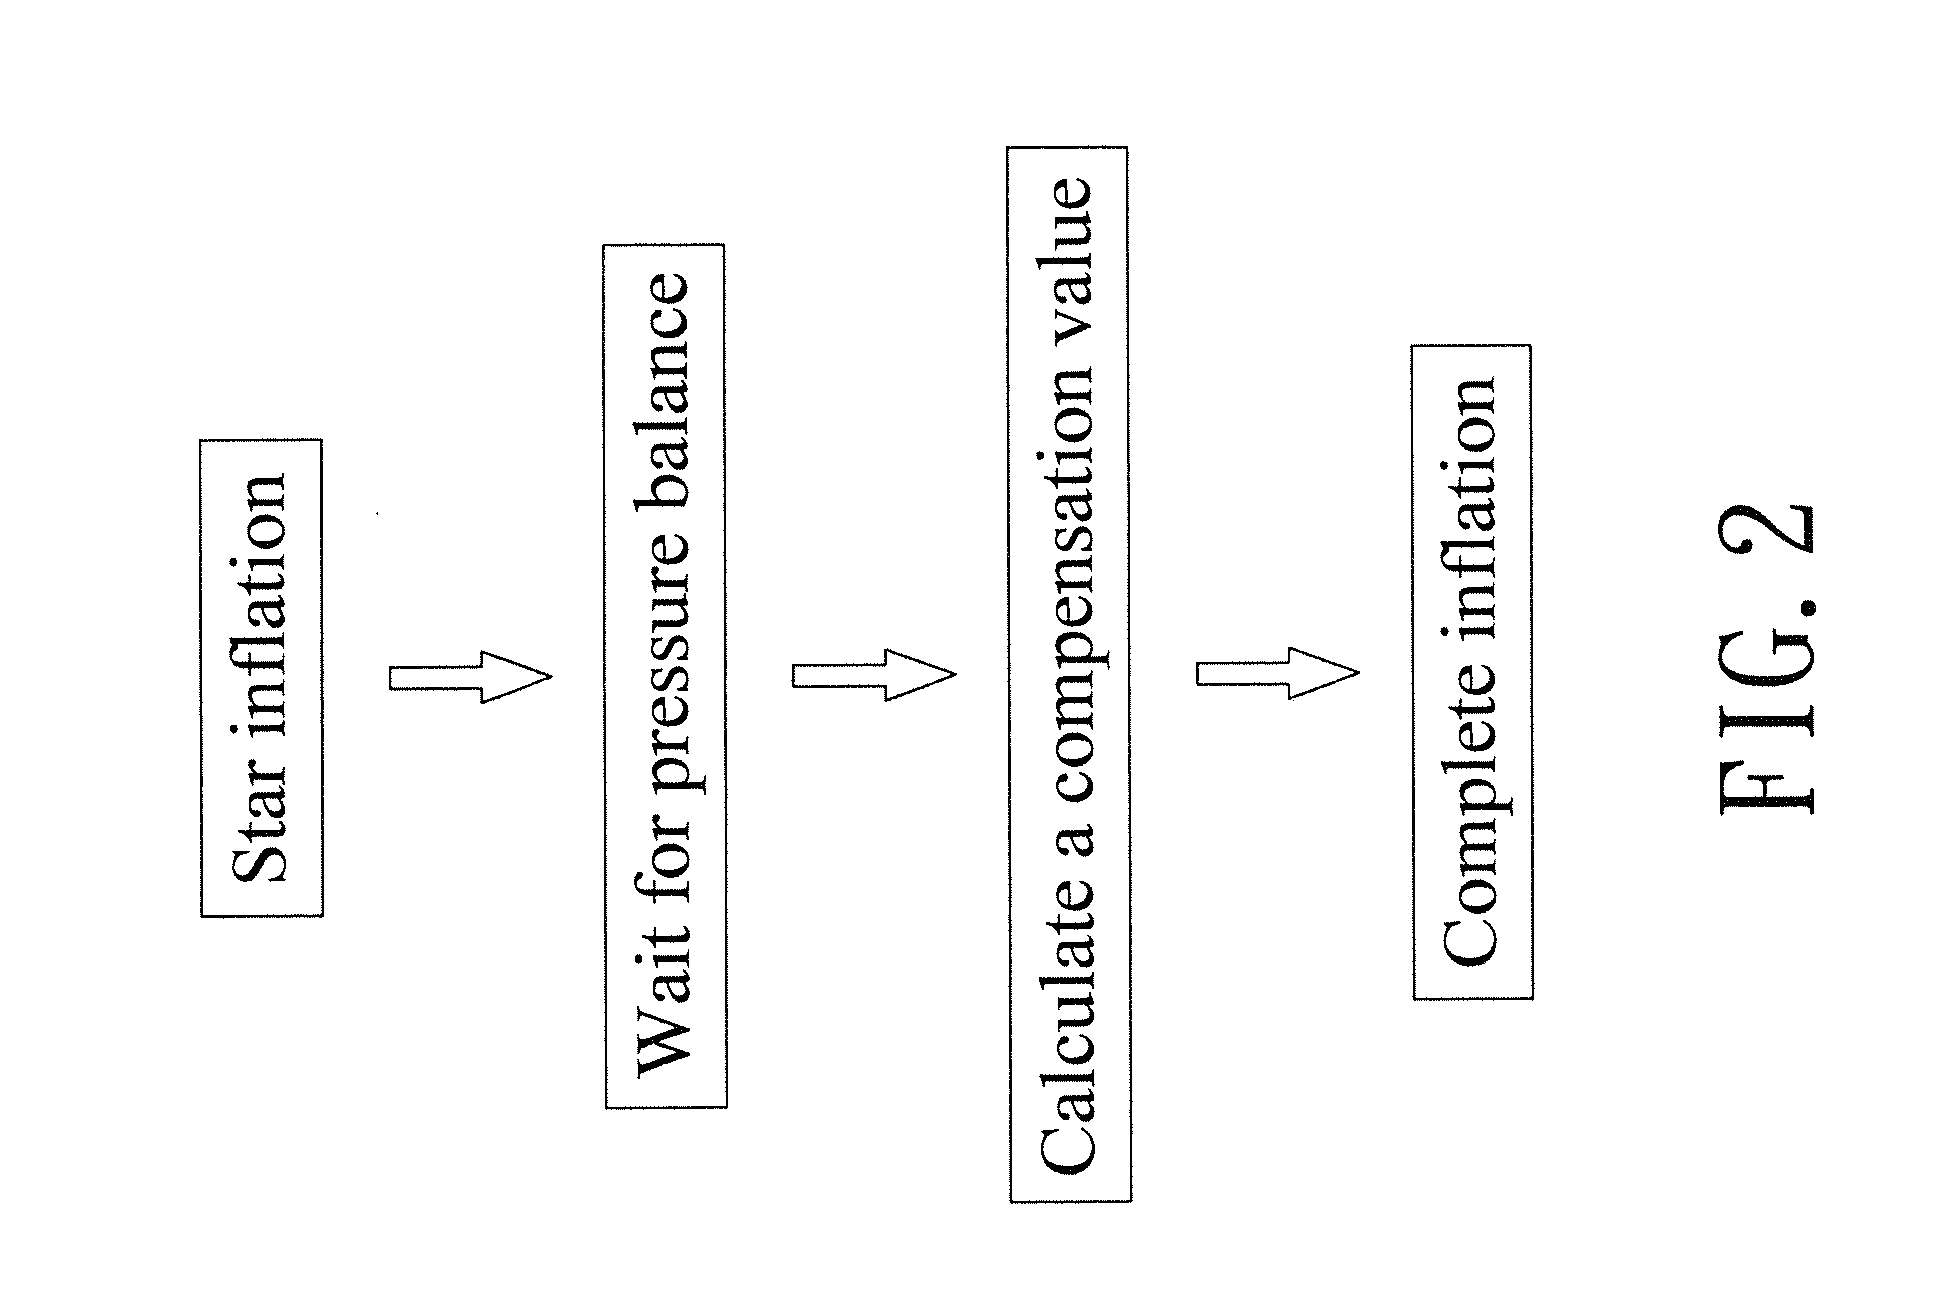 Automatic control method of inflation